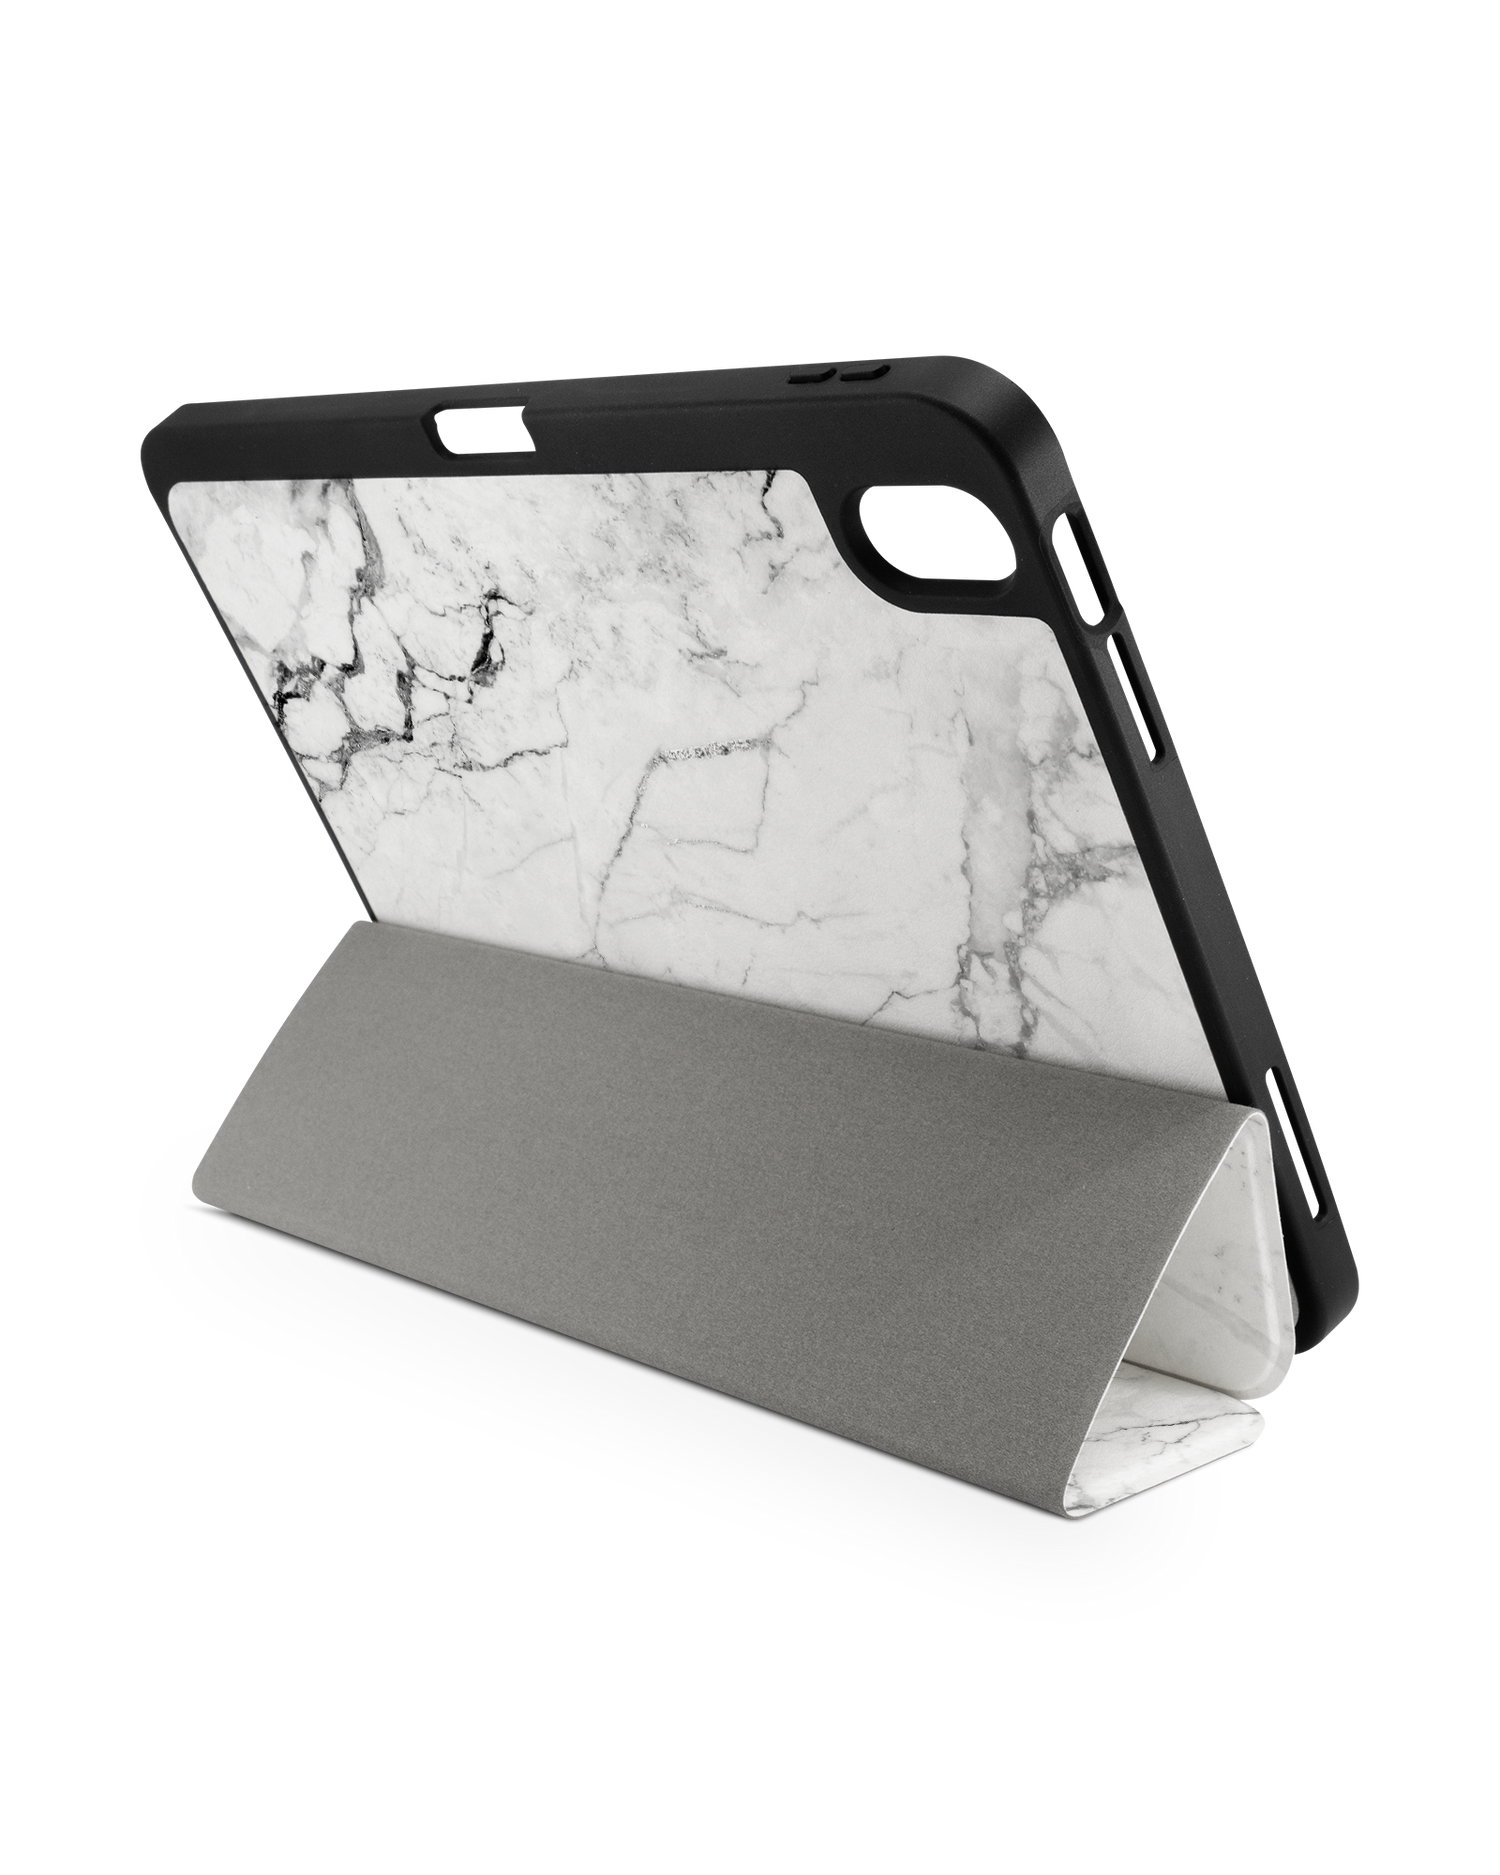 White Marble iPad Case with Pencil Holder for Apple iPad (10th Generation): Set up in landscape format (back view)